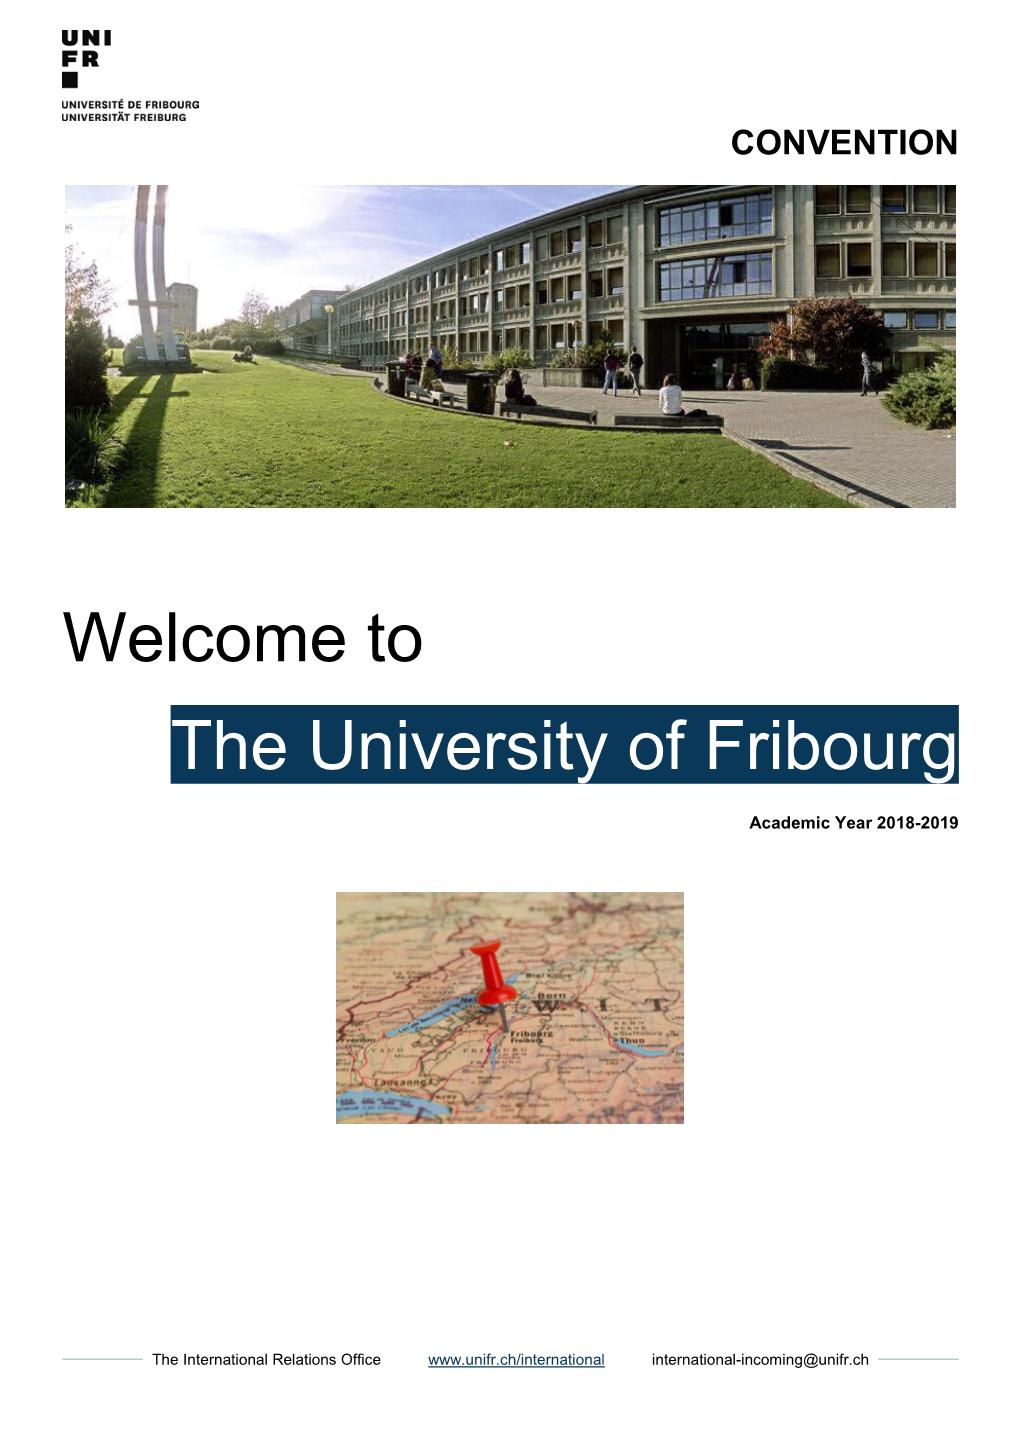 Welcome to the University of Fribourg